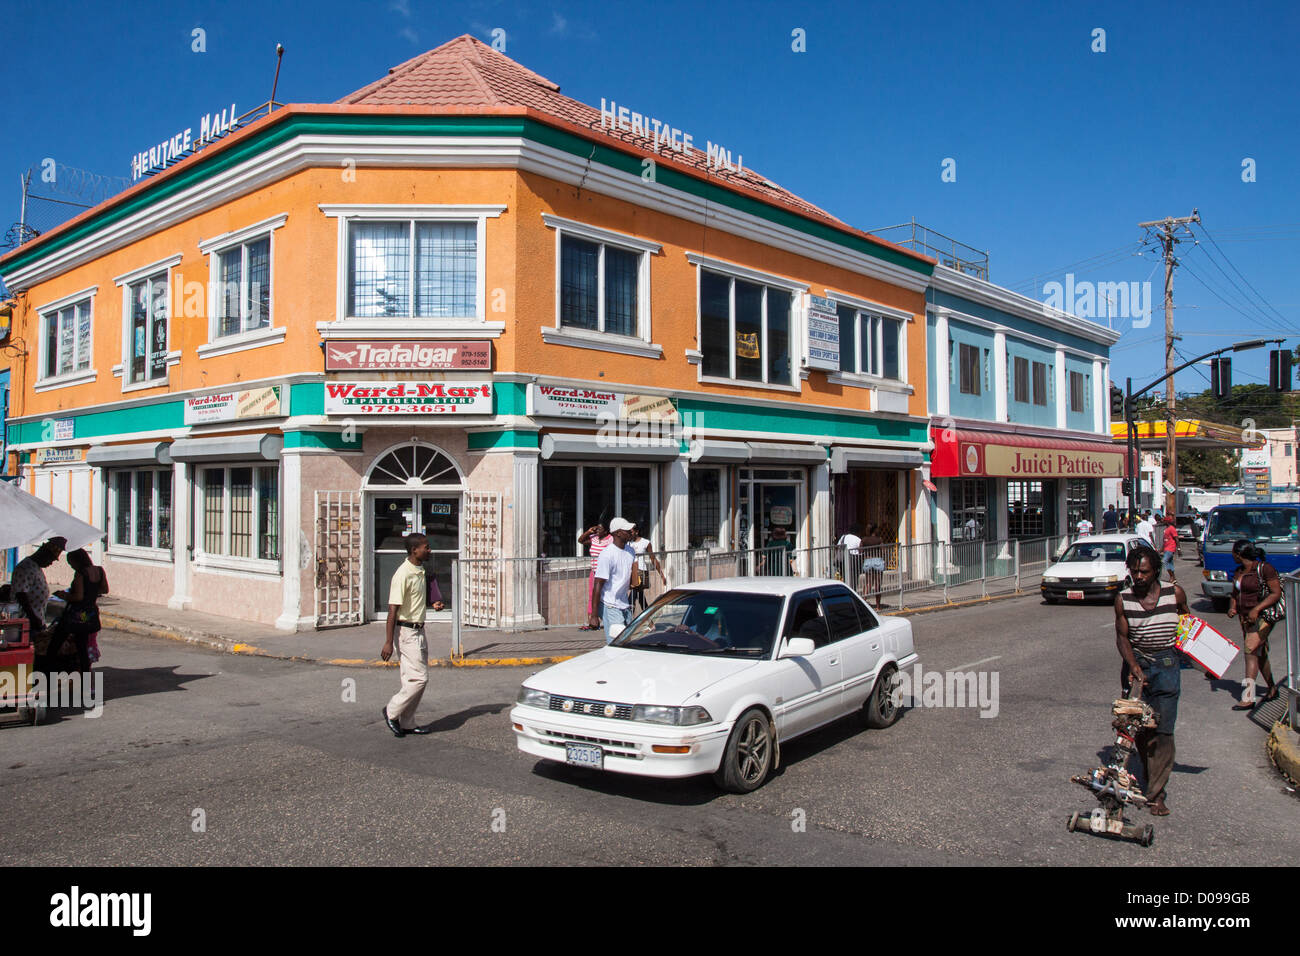 STREET SCENE IN THE TOWN CENTRE OF MONTEGO BAY JAMAICA THE CARIBBEAN Stock Photo